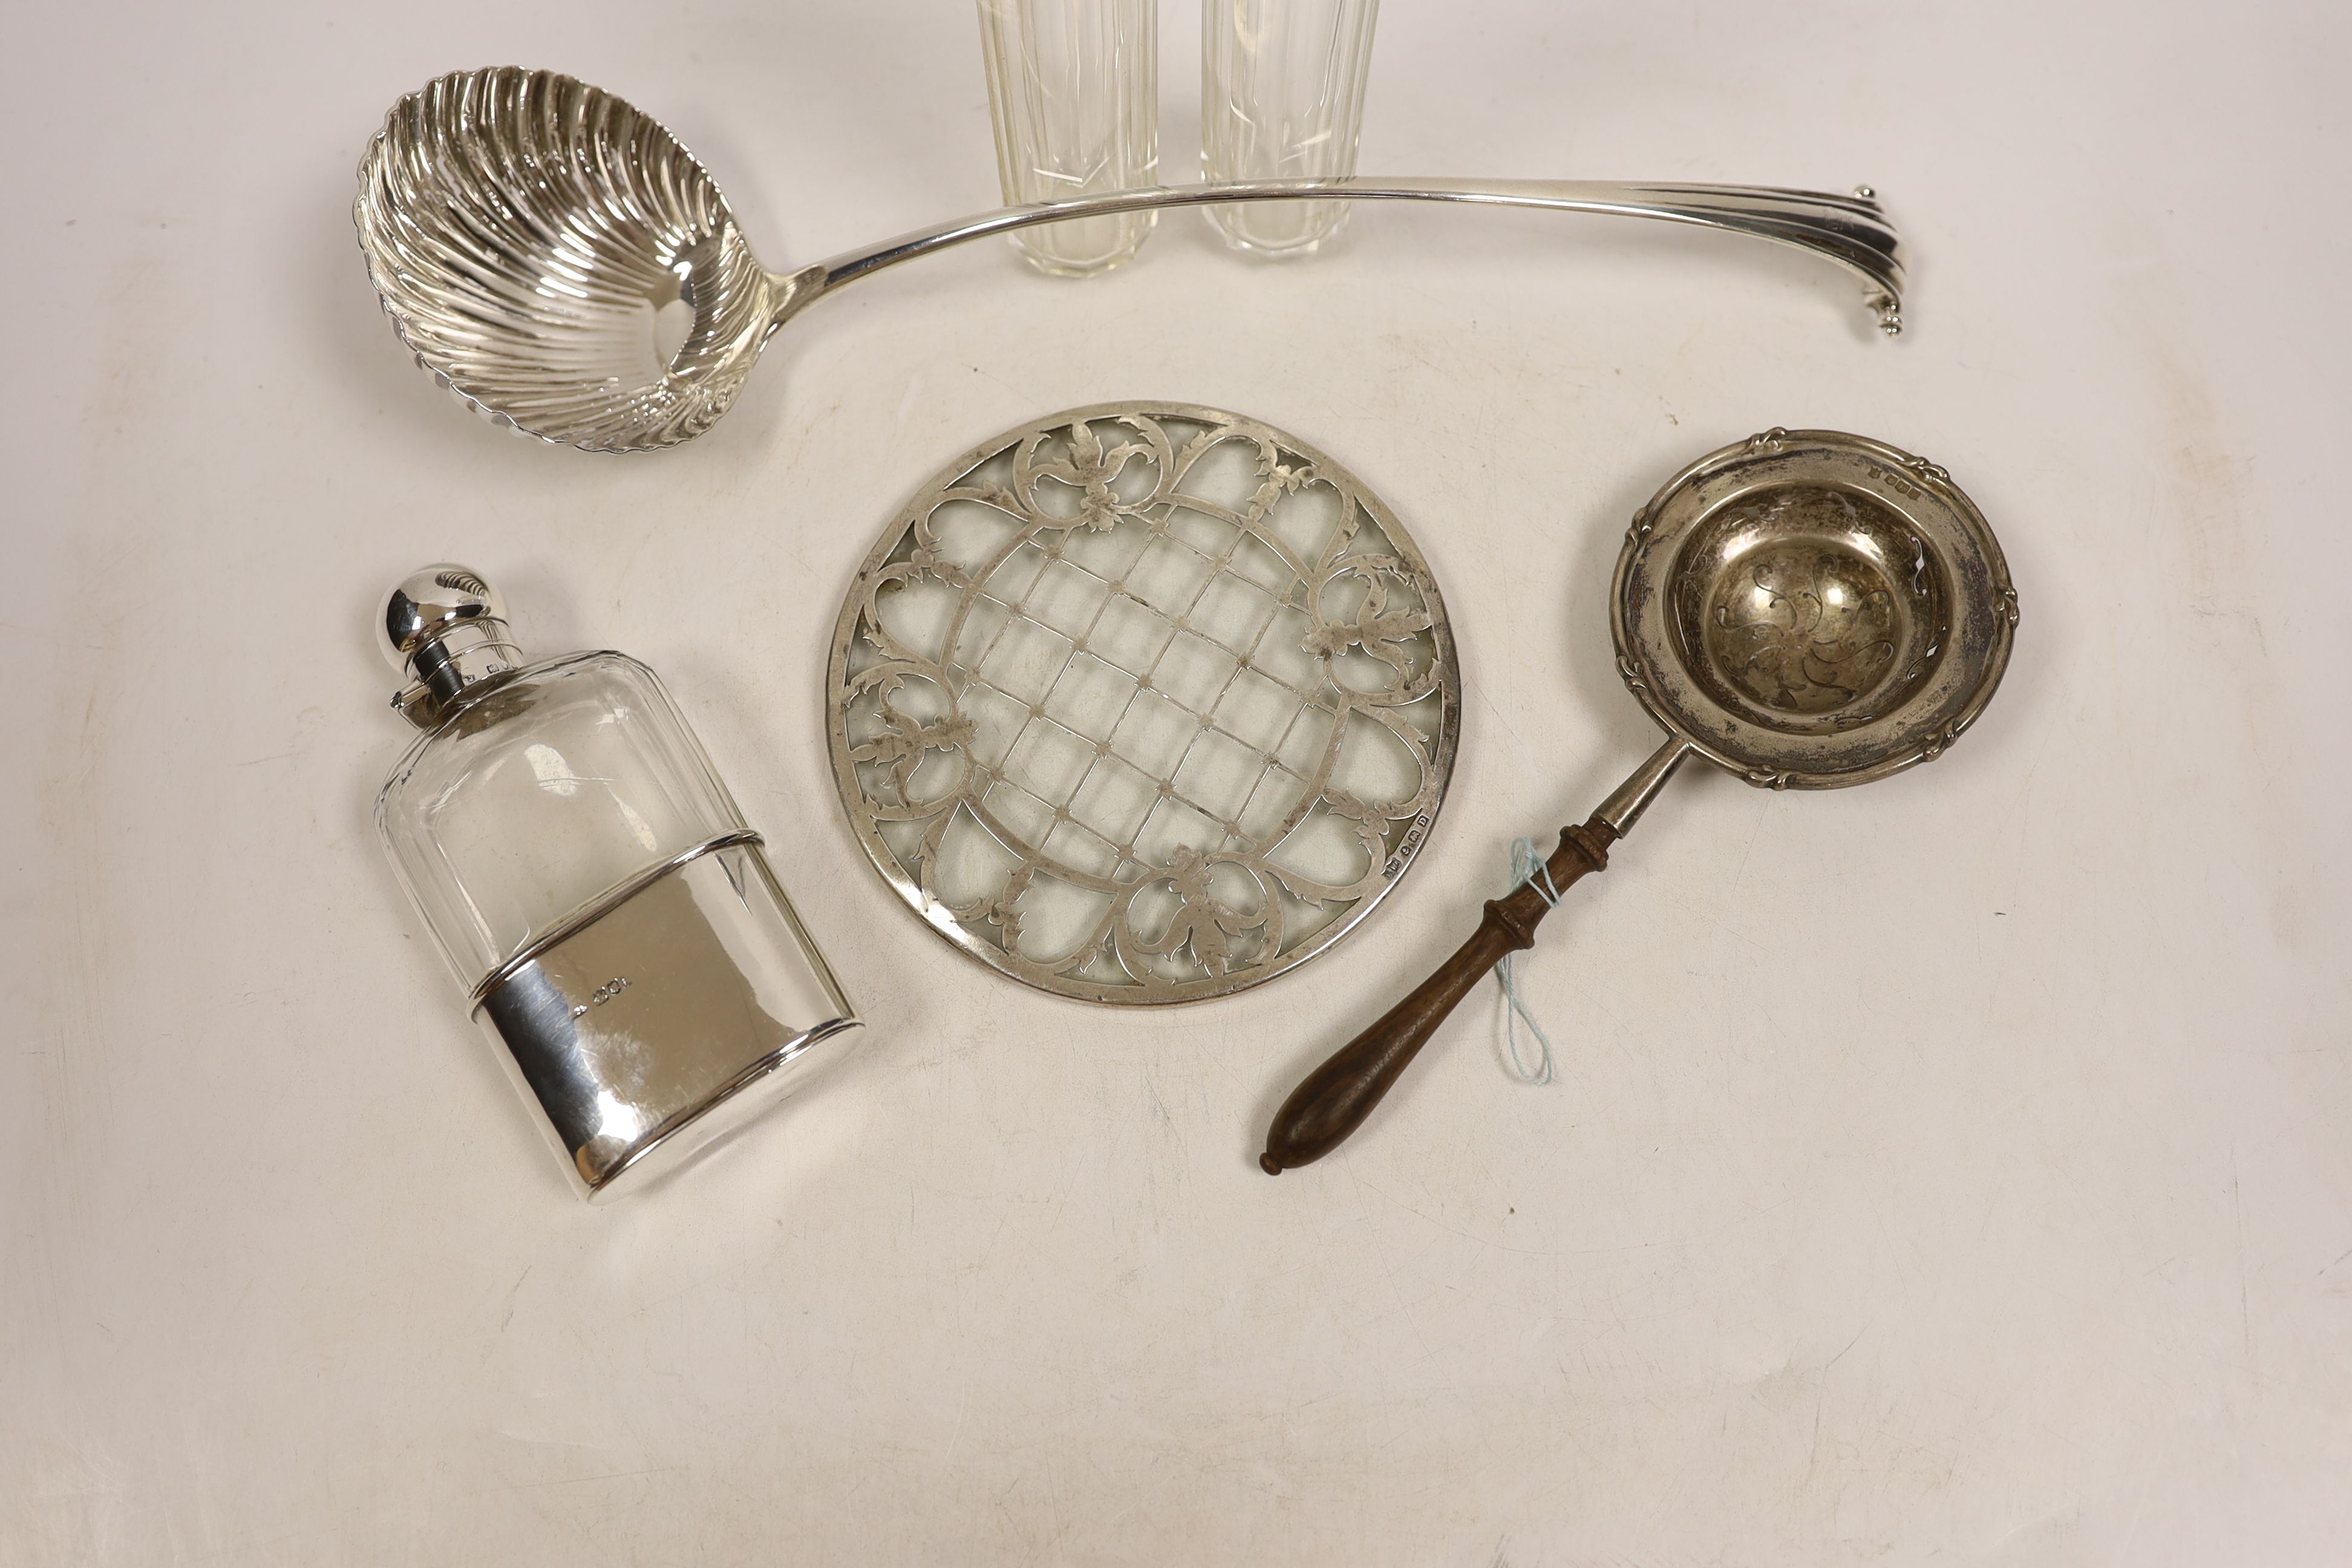 An 18th century silver base mark Onslow pattern soup ladle, indistinct marks and five other items including a silver mounted glass hip flask and a silver tea strainer with wooden handle.